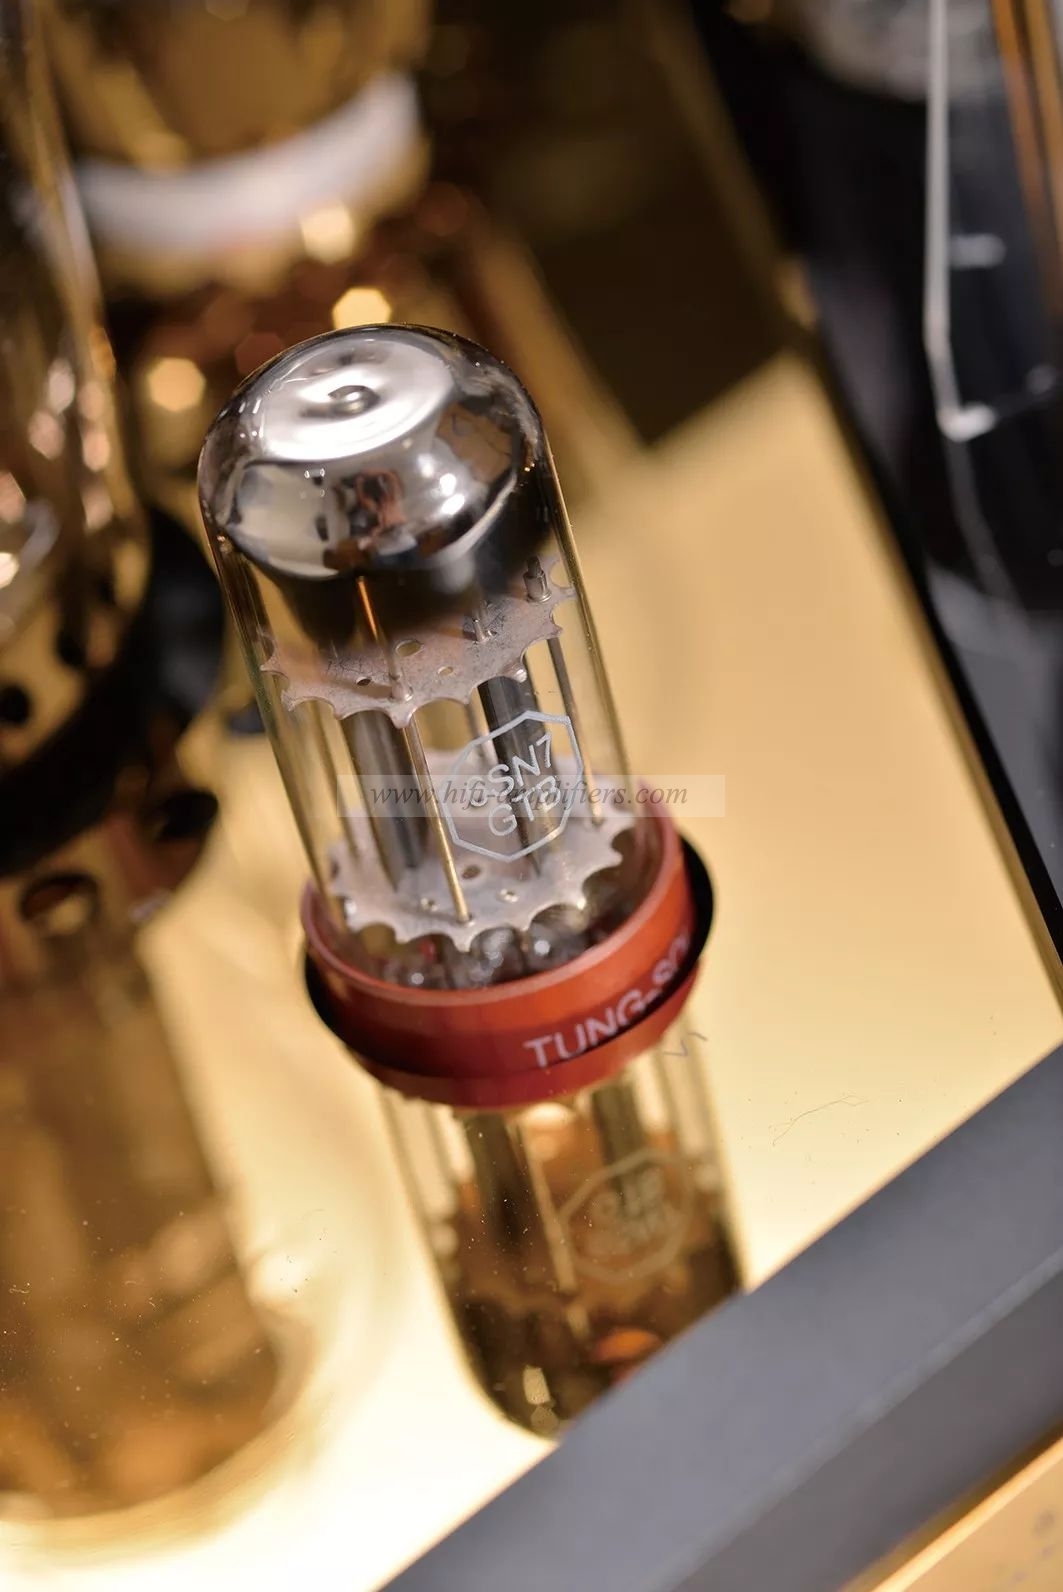 Cayin Spark A-845Pro 25th Anniversary Edition Single-ended Class A Tube Amplifier Amplifier